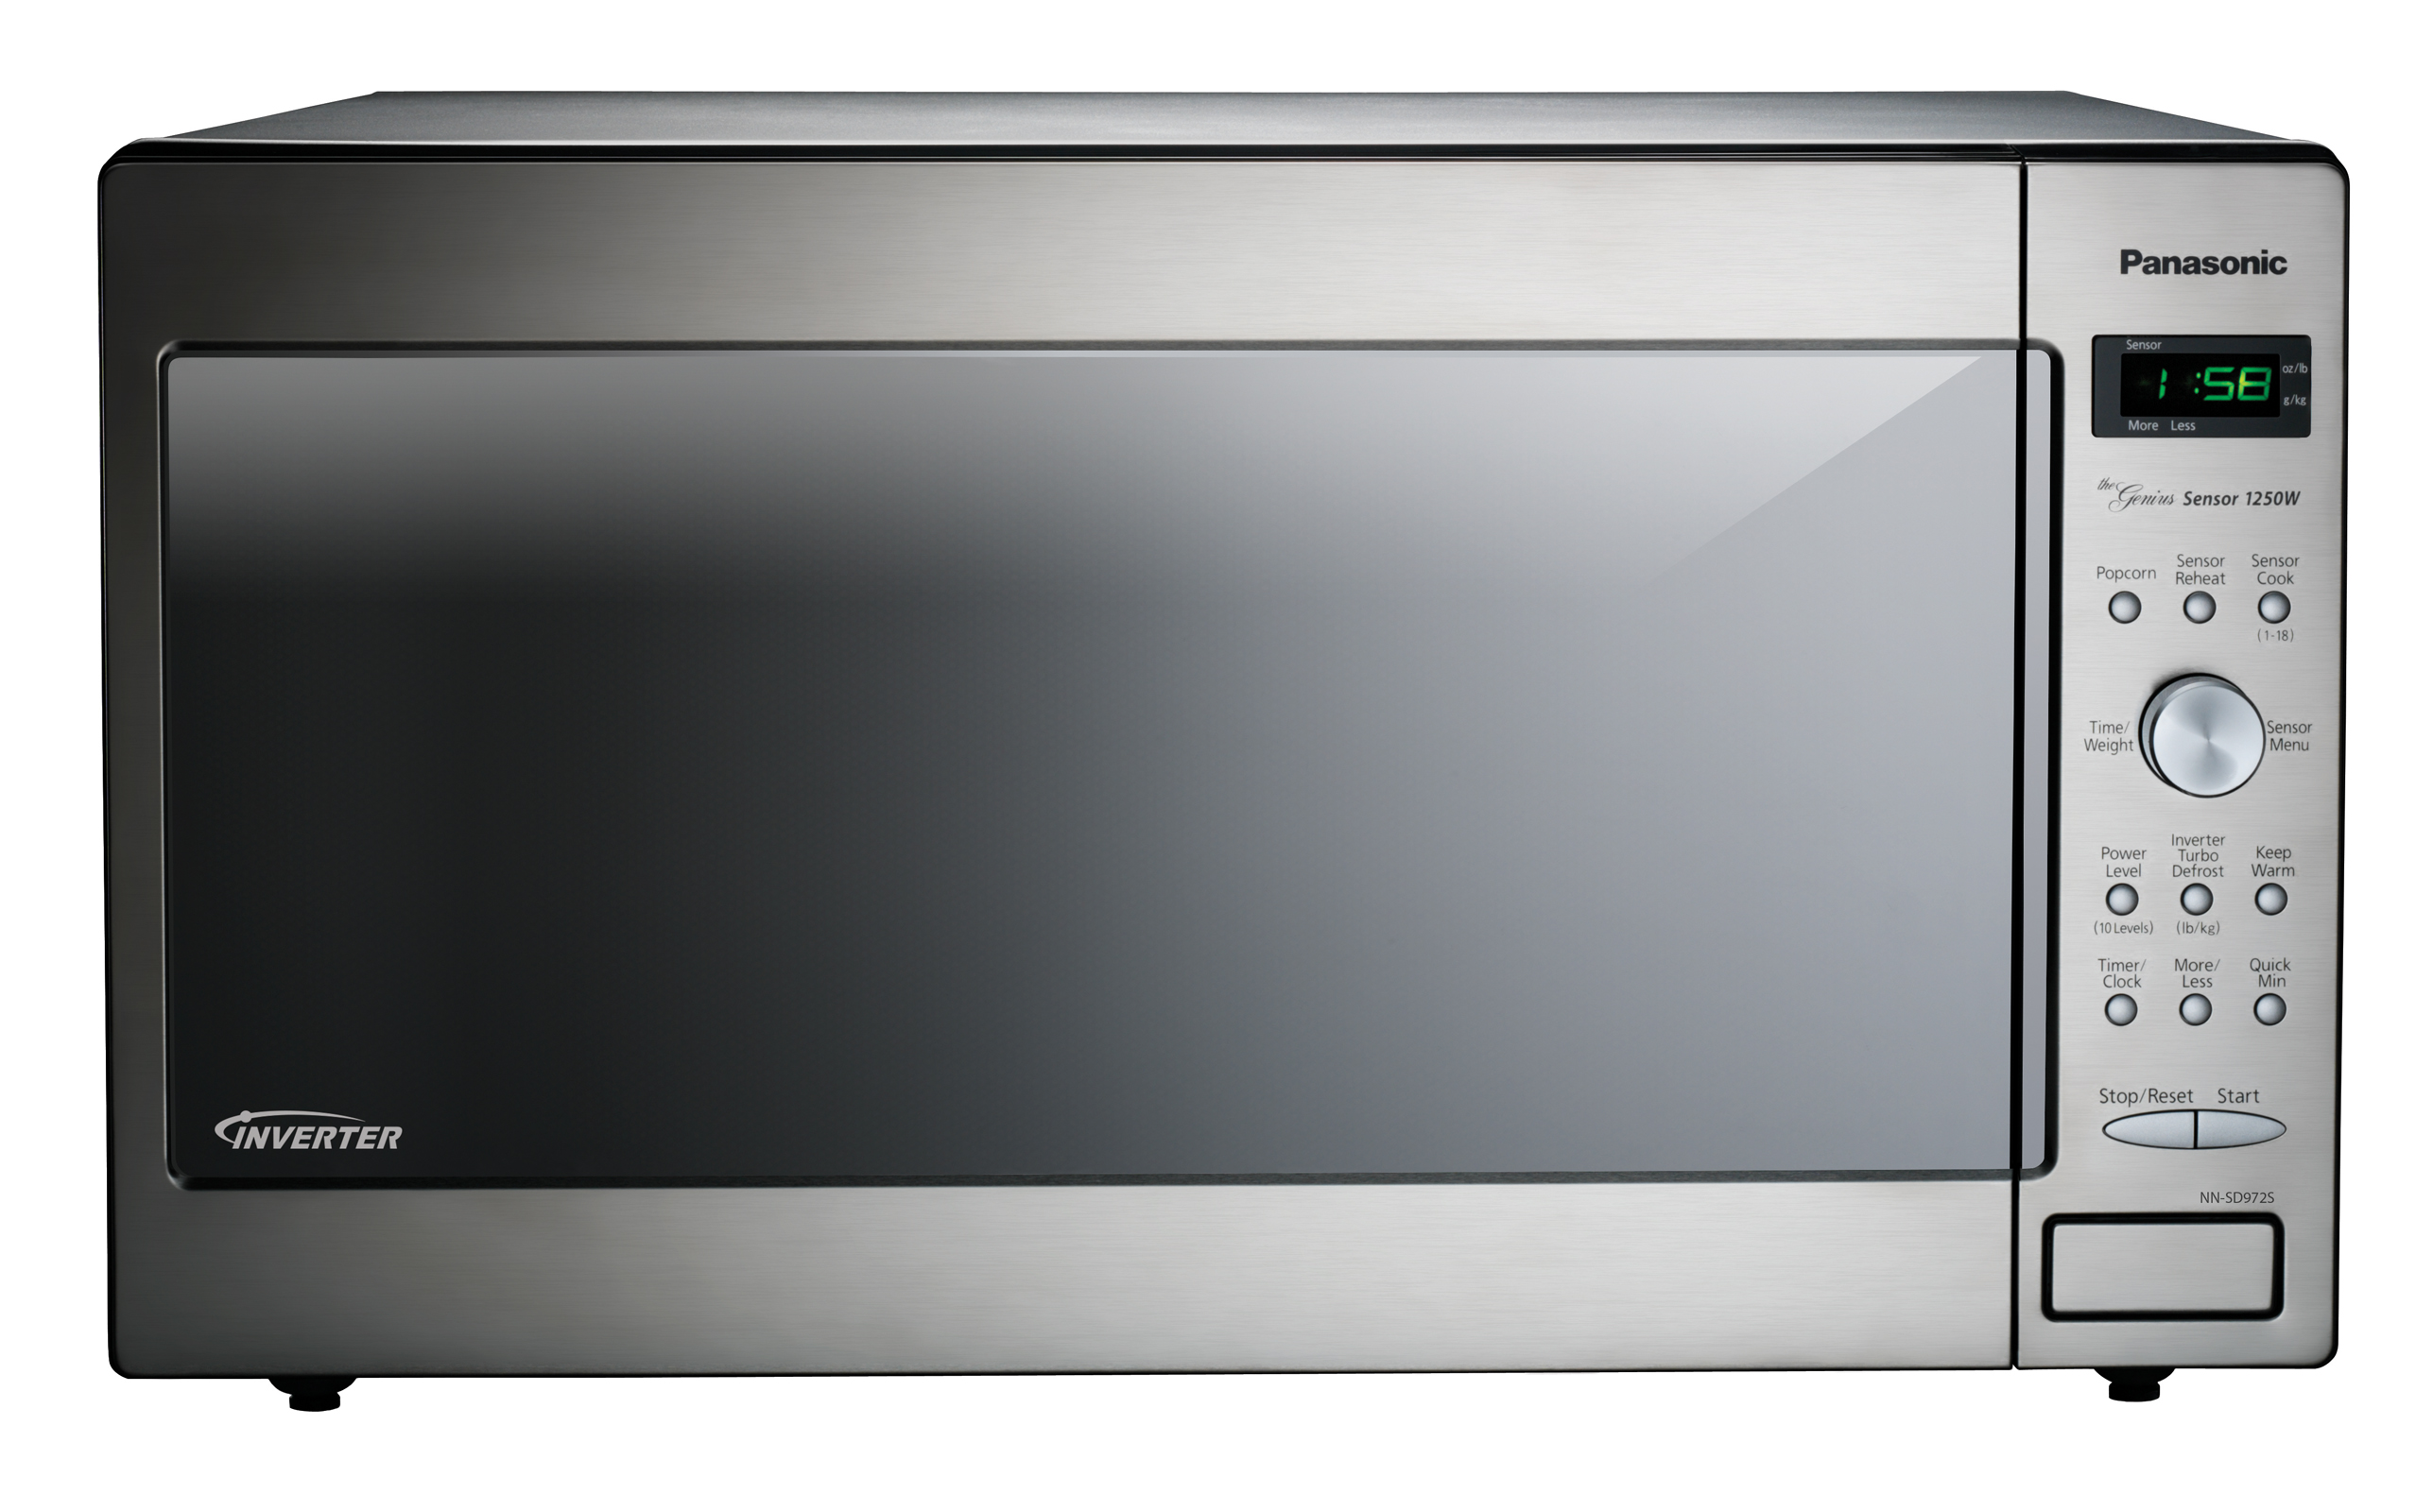 Panasonic NNSD972S - 2.2 cu. ft. Countertop/Built-In Microwave with